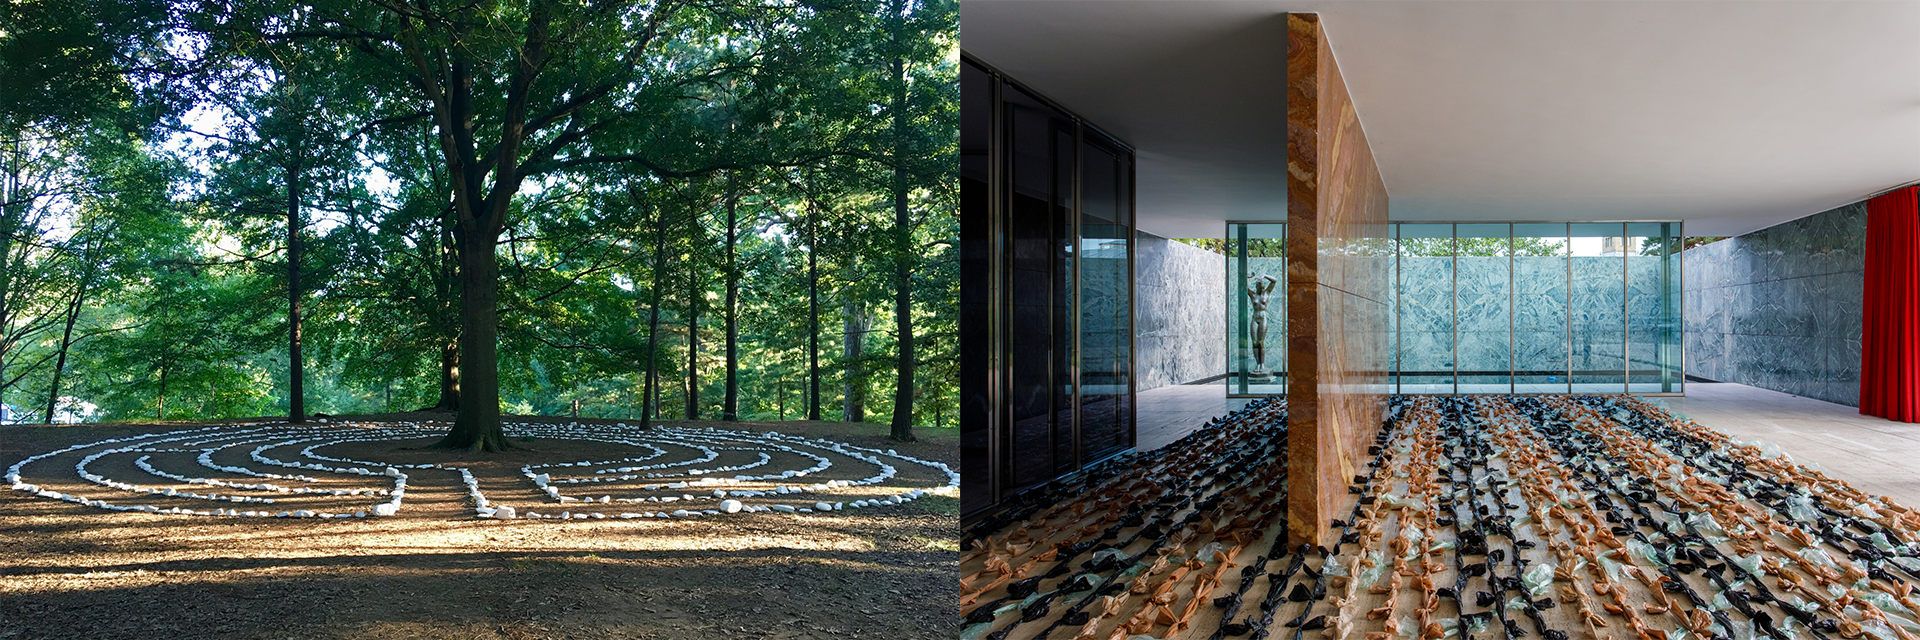 Side-by-side composite image. The left side shows a labyrinth of porcelain stones around a tree. The right side shows a carpet made of disposable plastic bags on the floor of the main room in Mies van der Rohe Pavilion